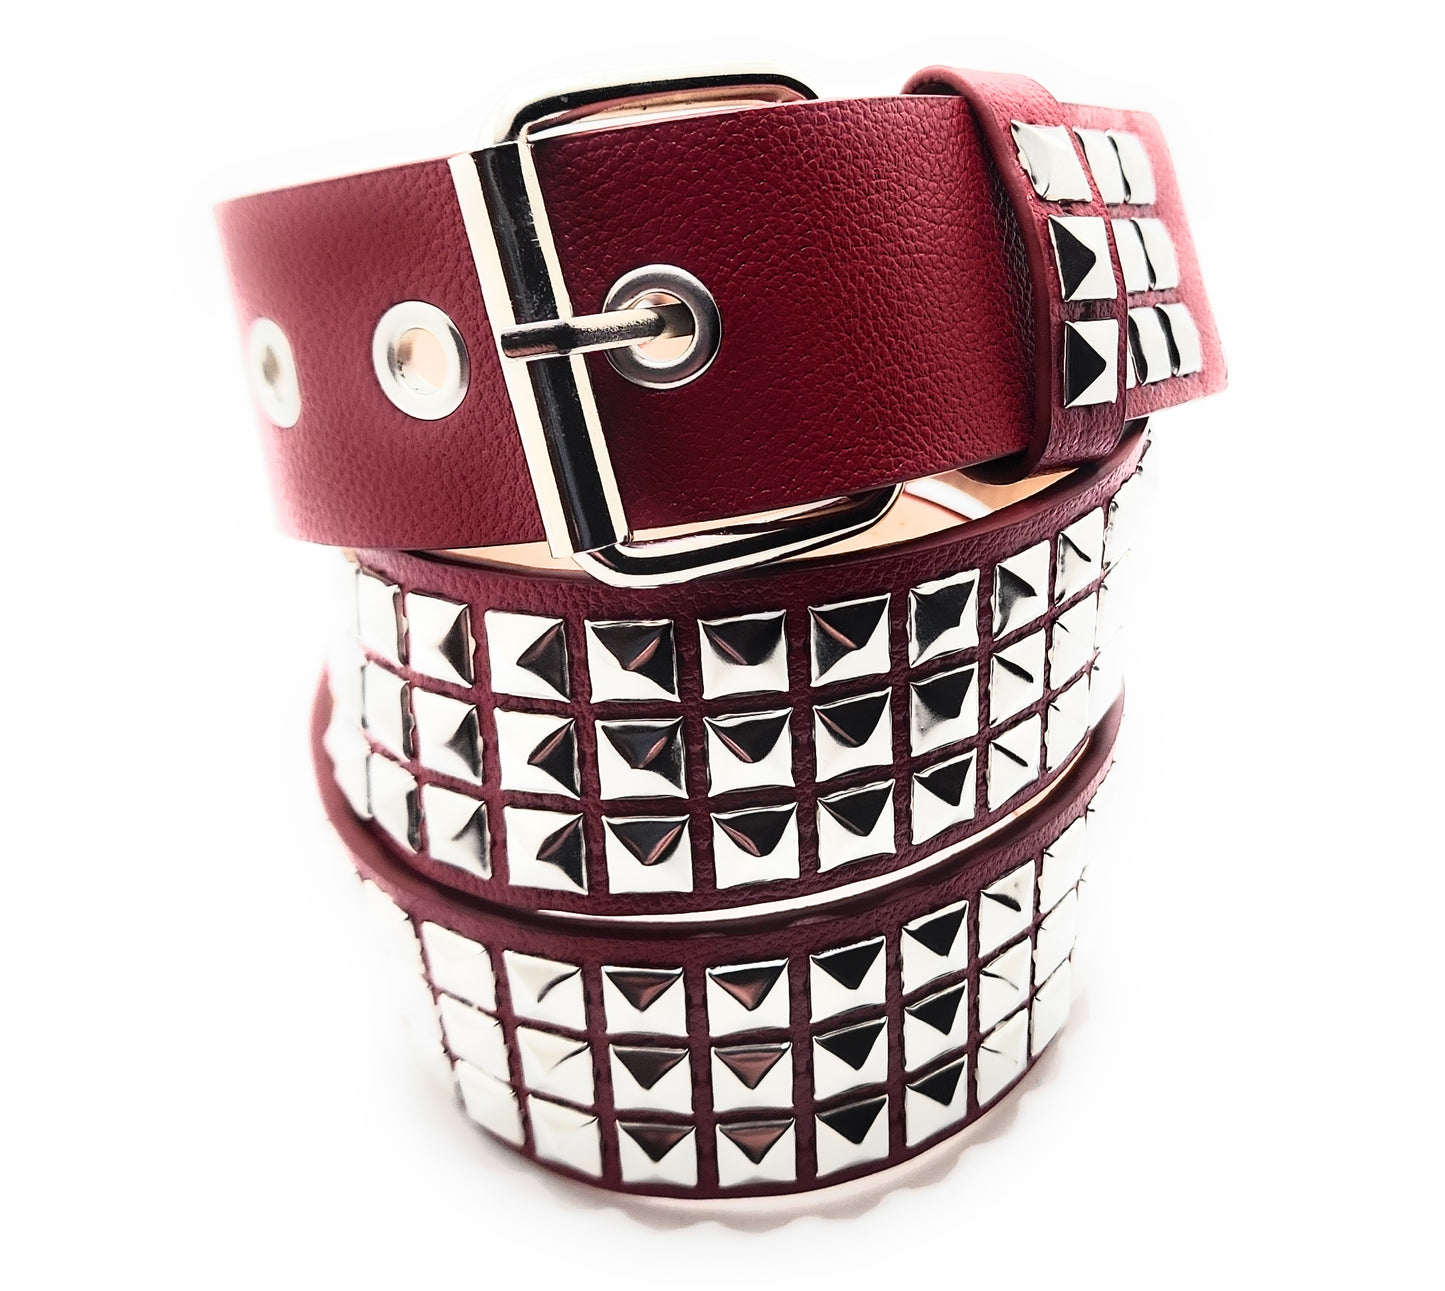 Silver on Dark Red Studded Belt Trim-to-Fit